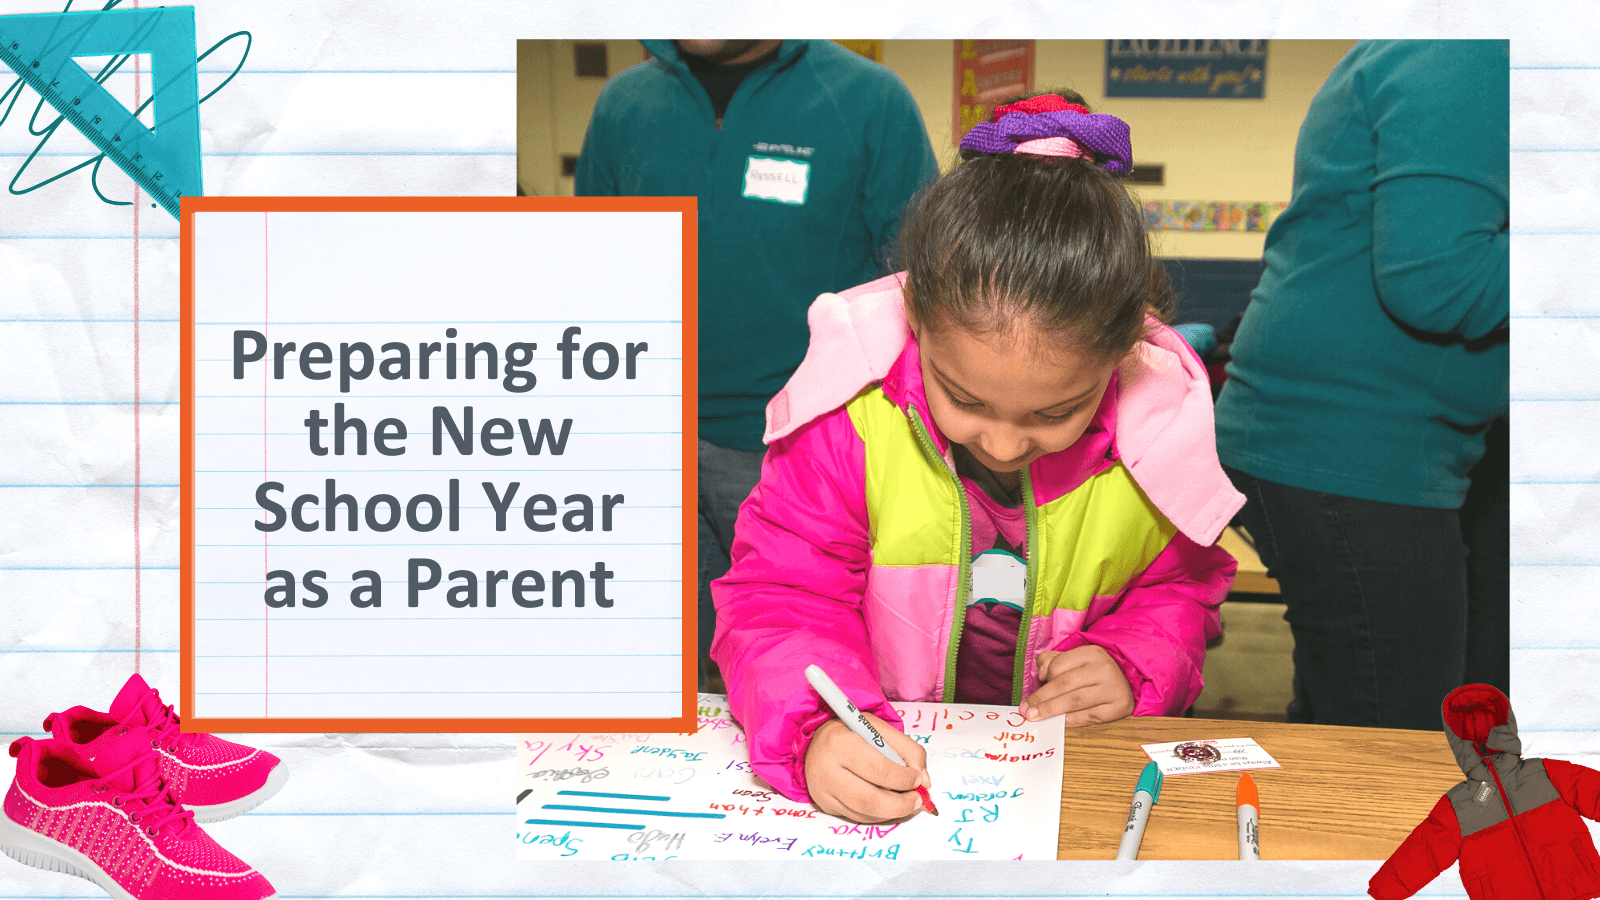 Preparing for the New School Year as a Parent